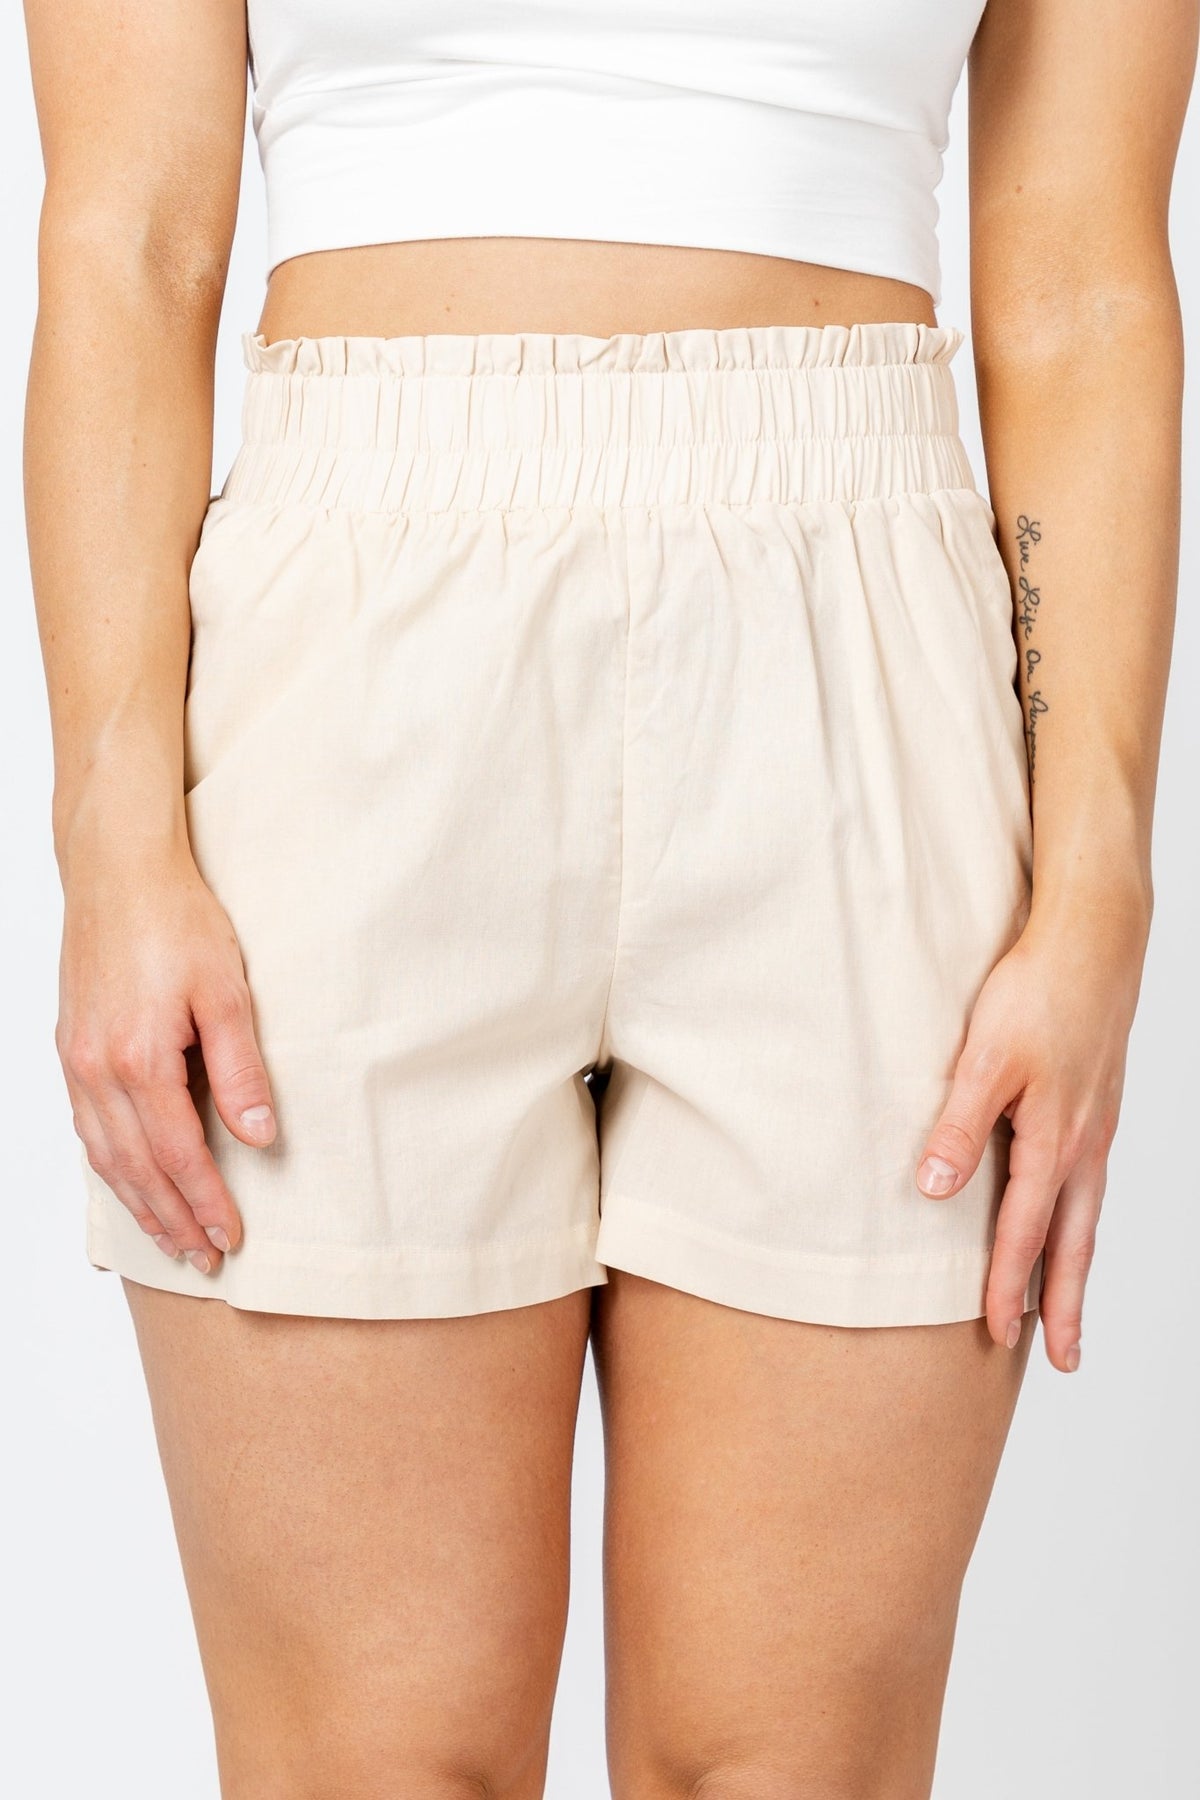 Stretch waist shorts natural - Cute shorts - Trendy Shorts at Lush Fashion Lounge Boutique in Oklahoma City